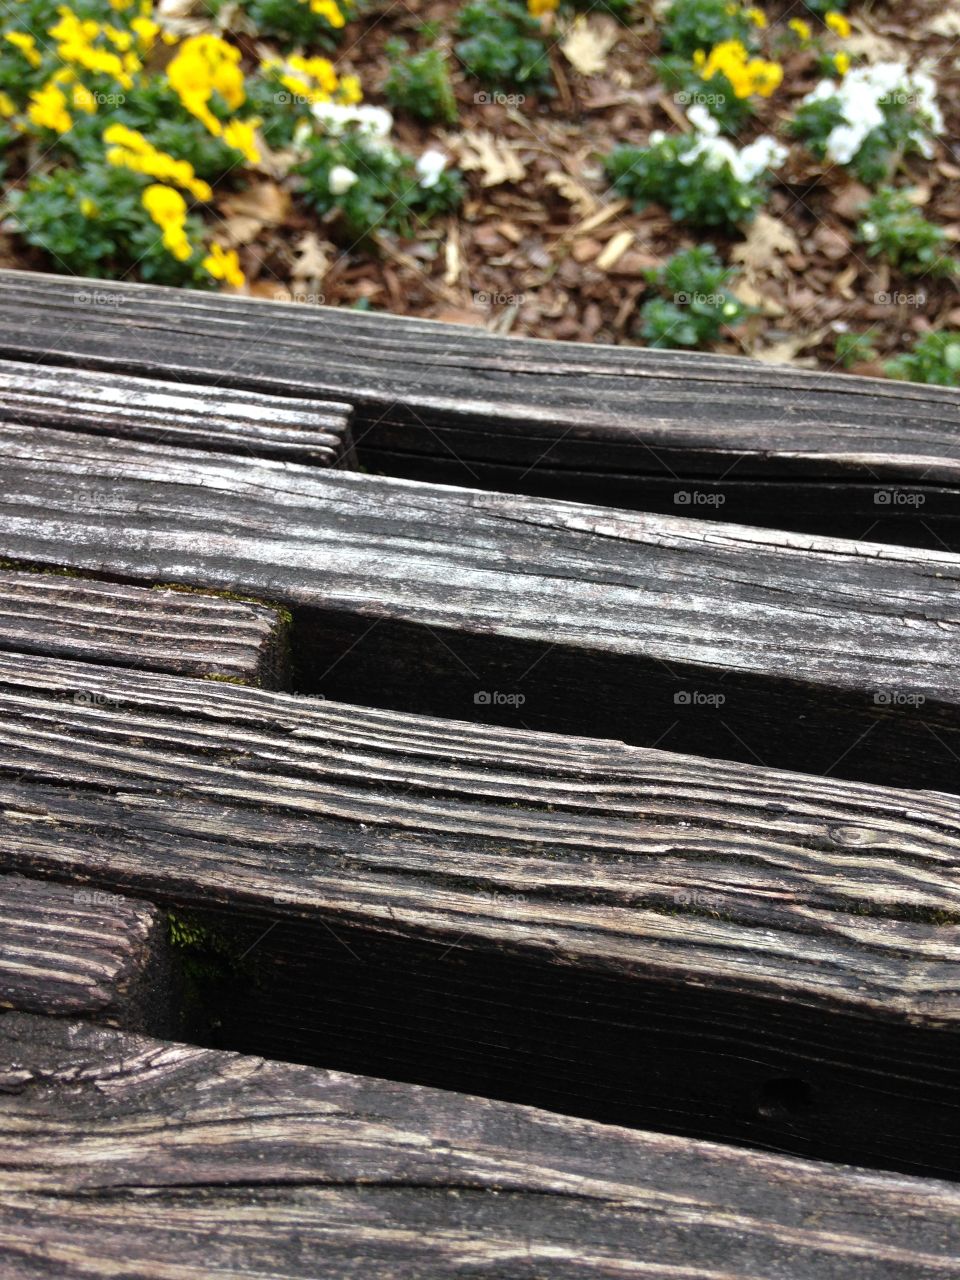 Wooden bench with yellow flowers blooming in background